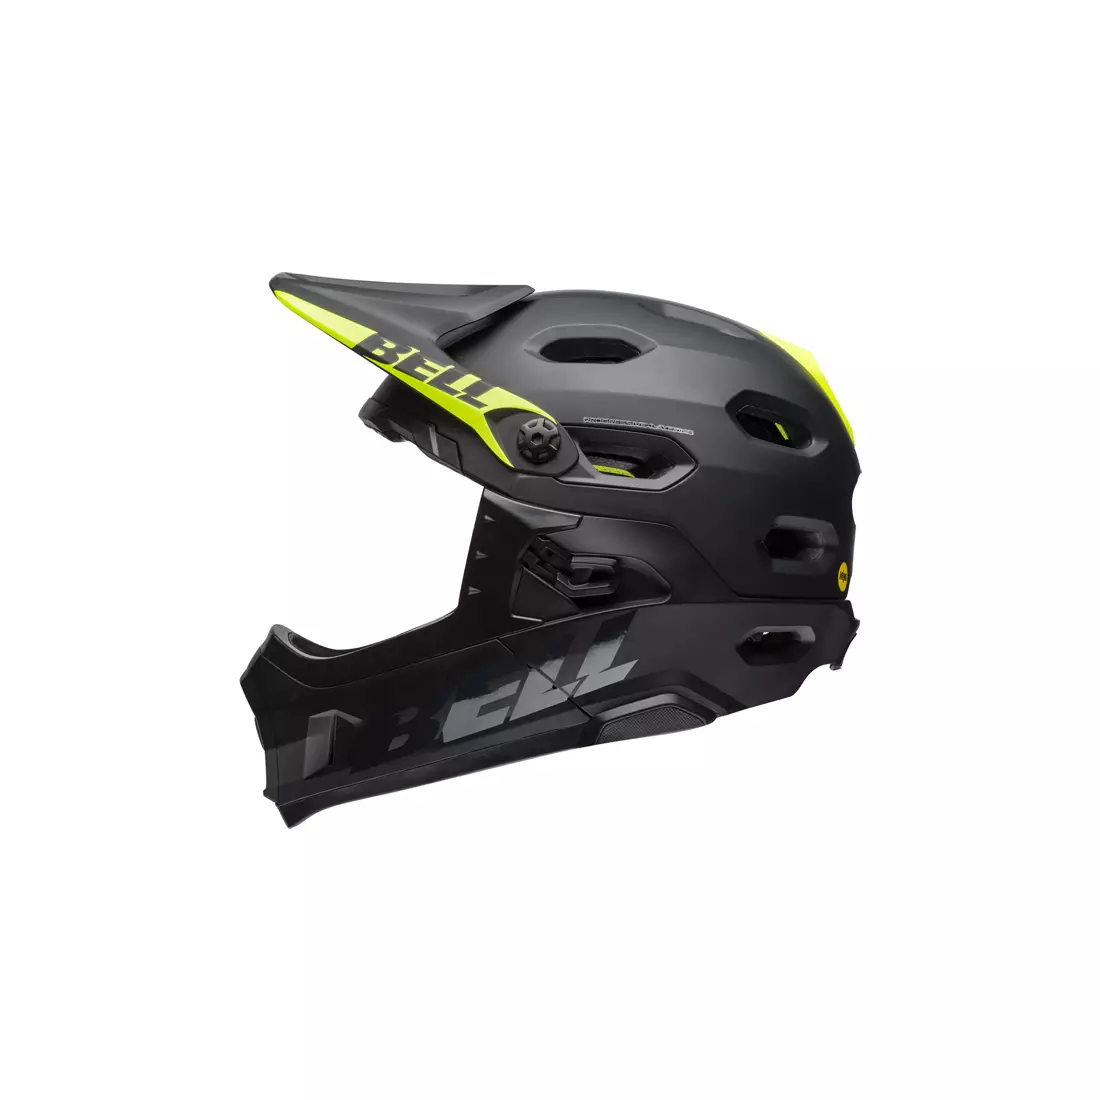 BELL SUPER DH MIPS SPHERICAL kask rowerowy full face, matte gloss black